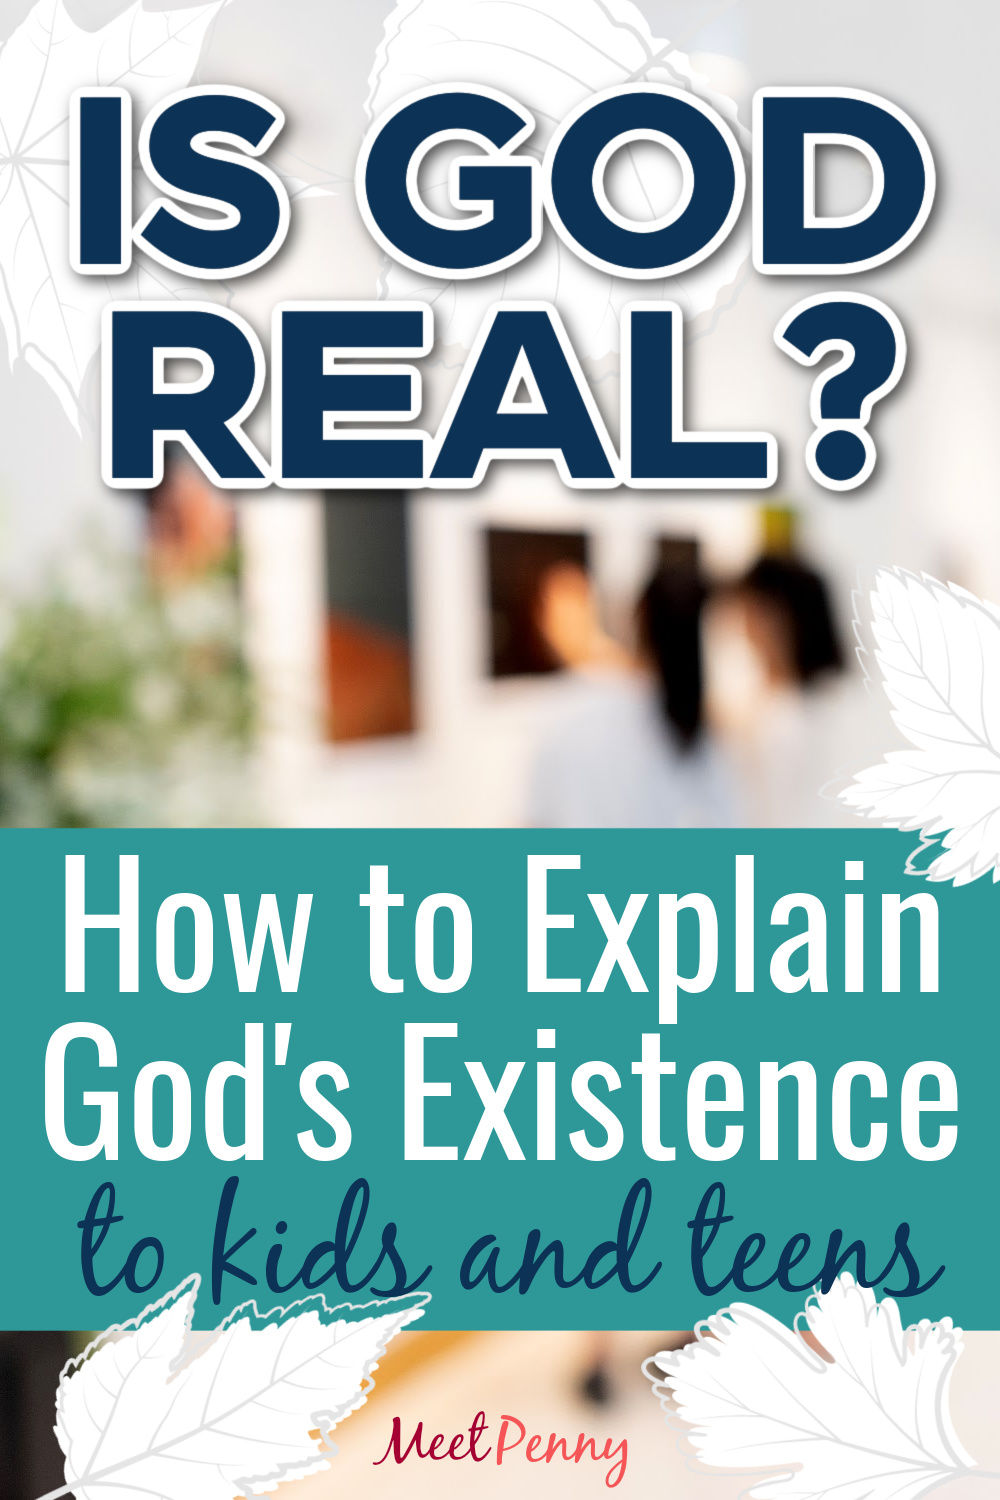 Great Object Lesson for the question Is God Real. Step by step guide for when kids or teens doubt God exists.